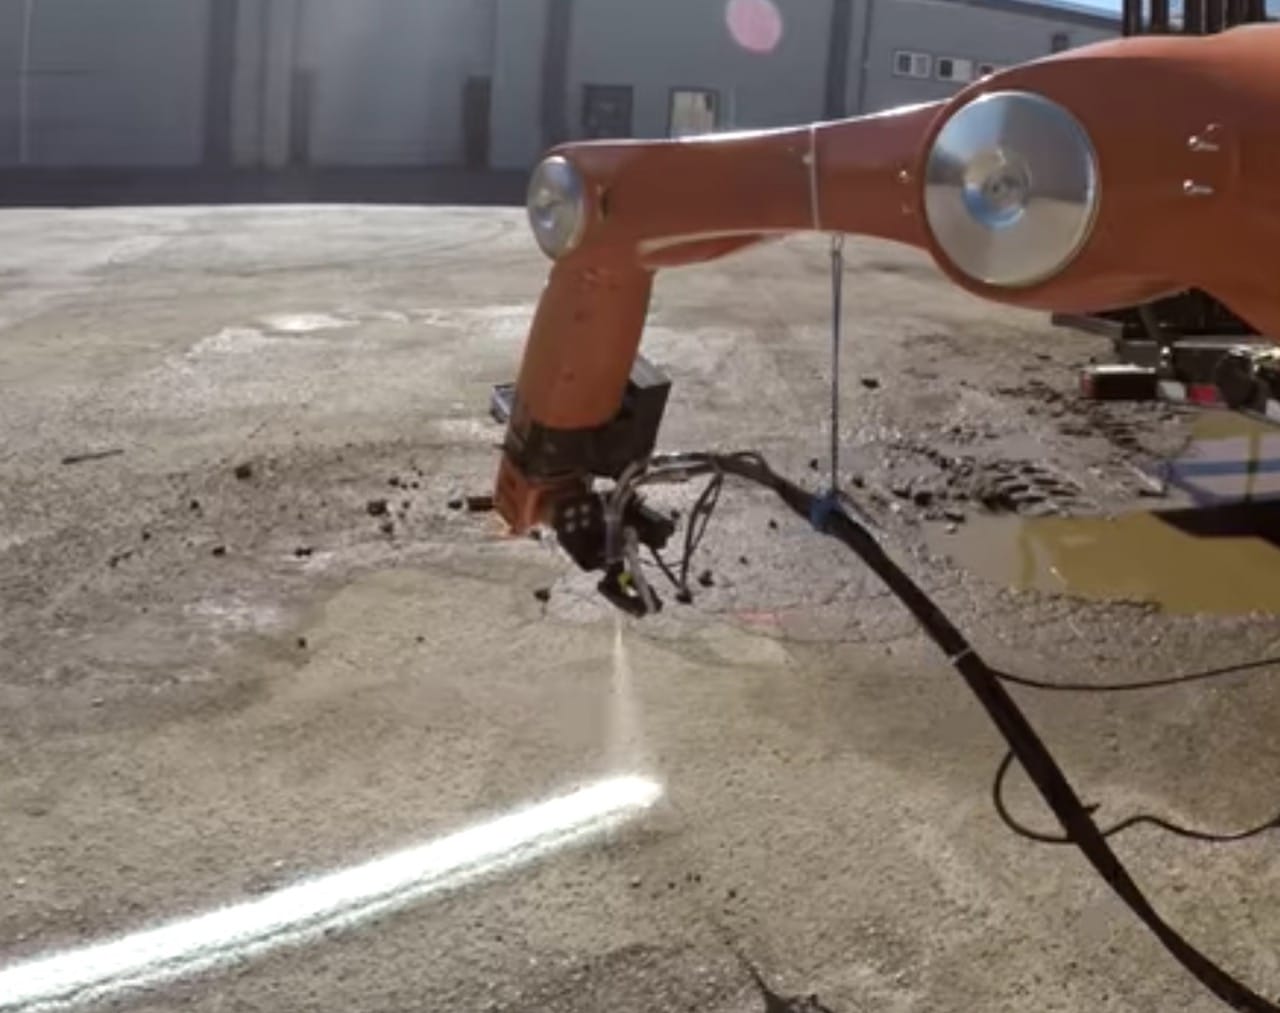  MIT's 3D printed building concept involves a Kuka robot arm spraying material directly on the surface 